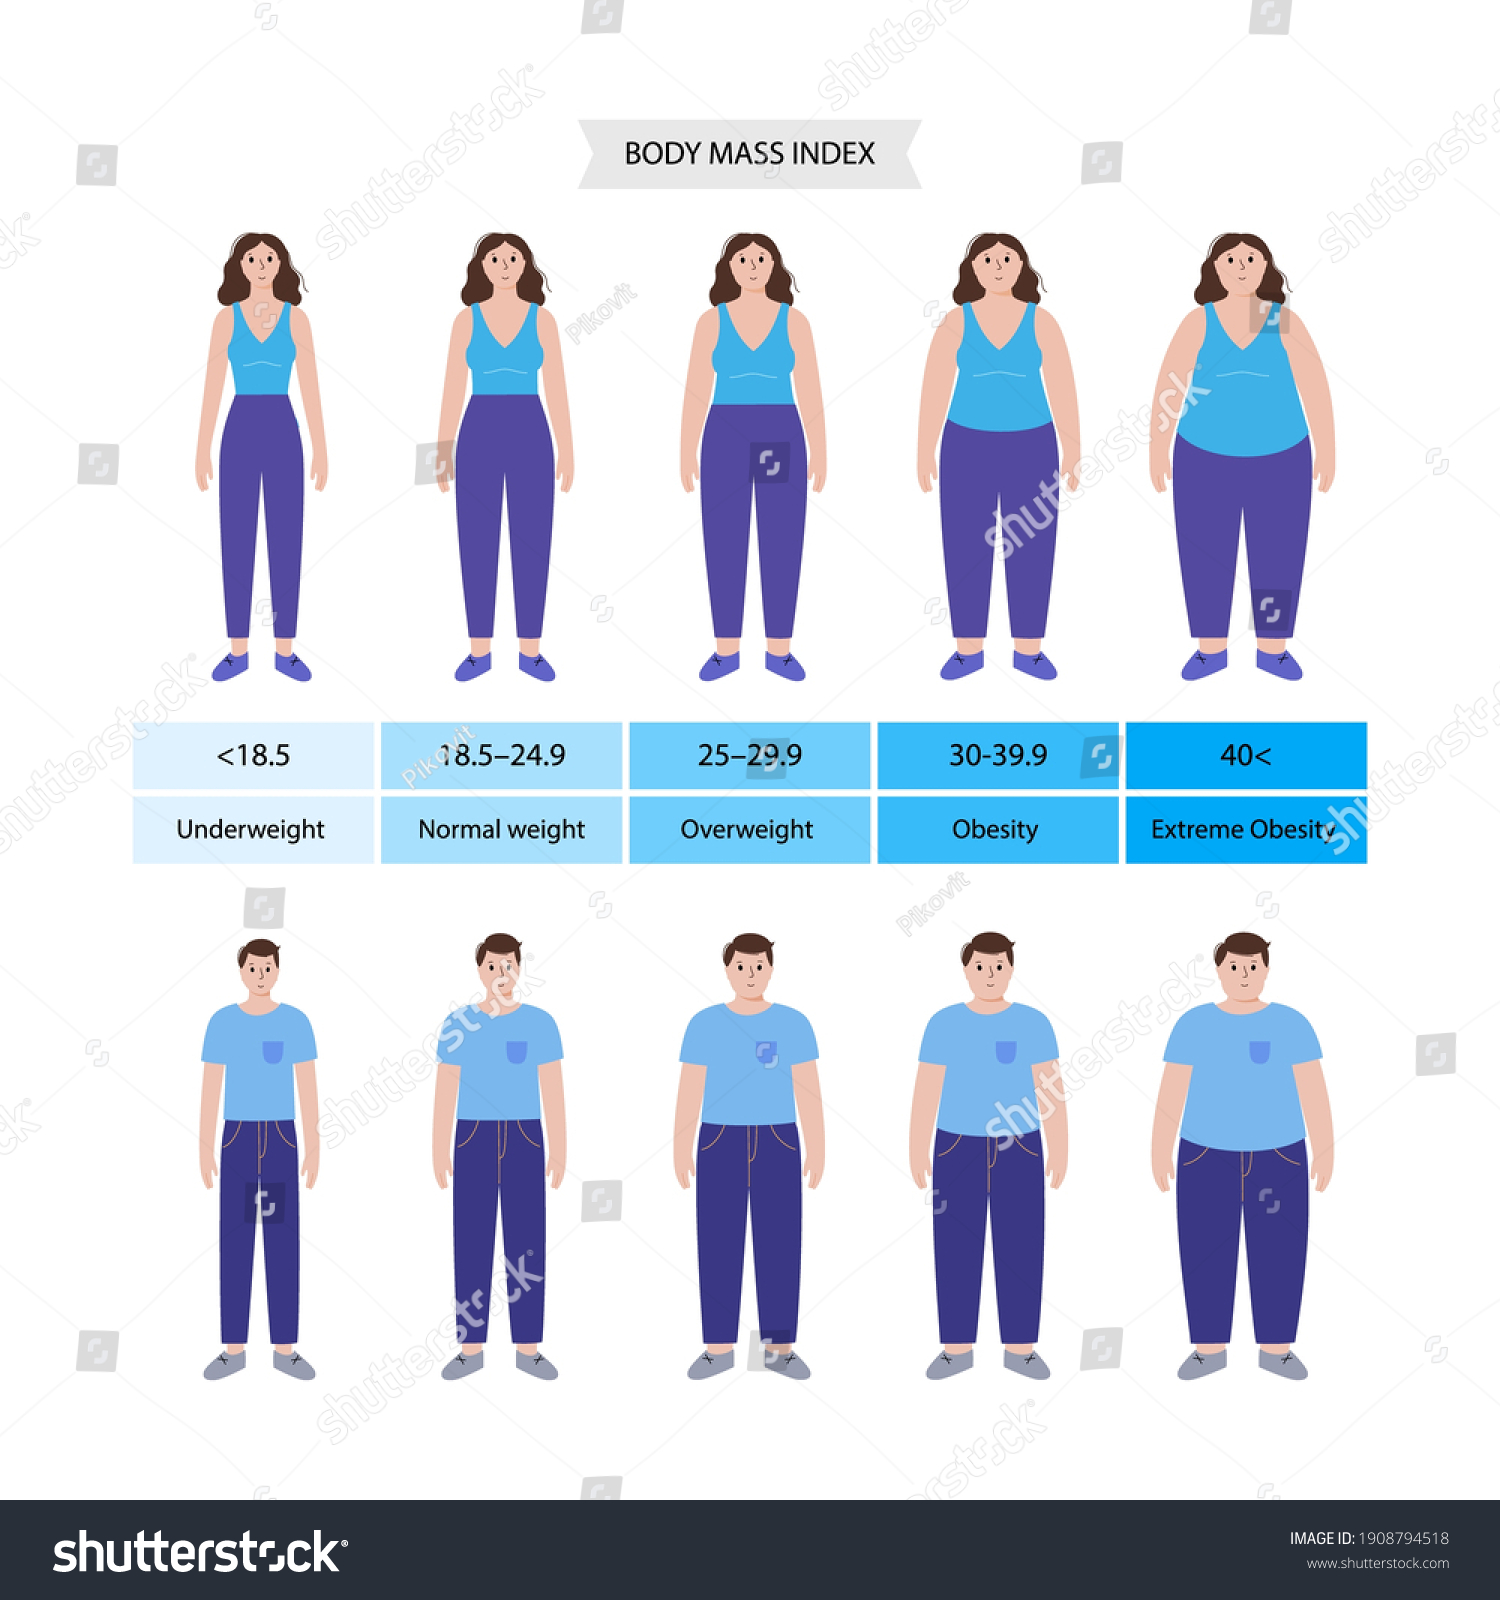 What Is A Healthy Body Mass Index For A Woman